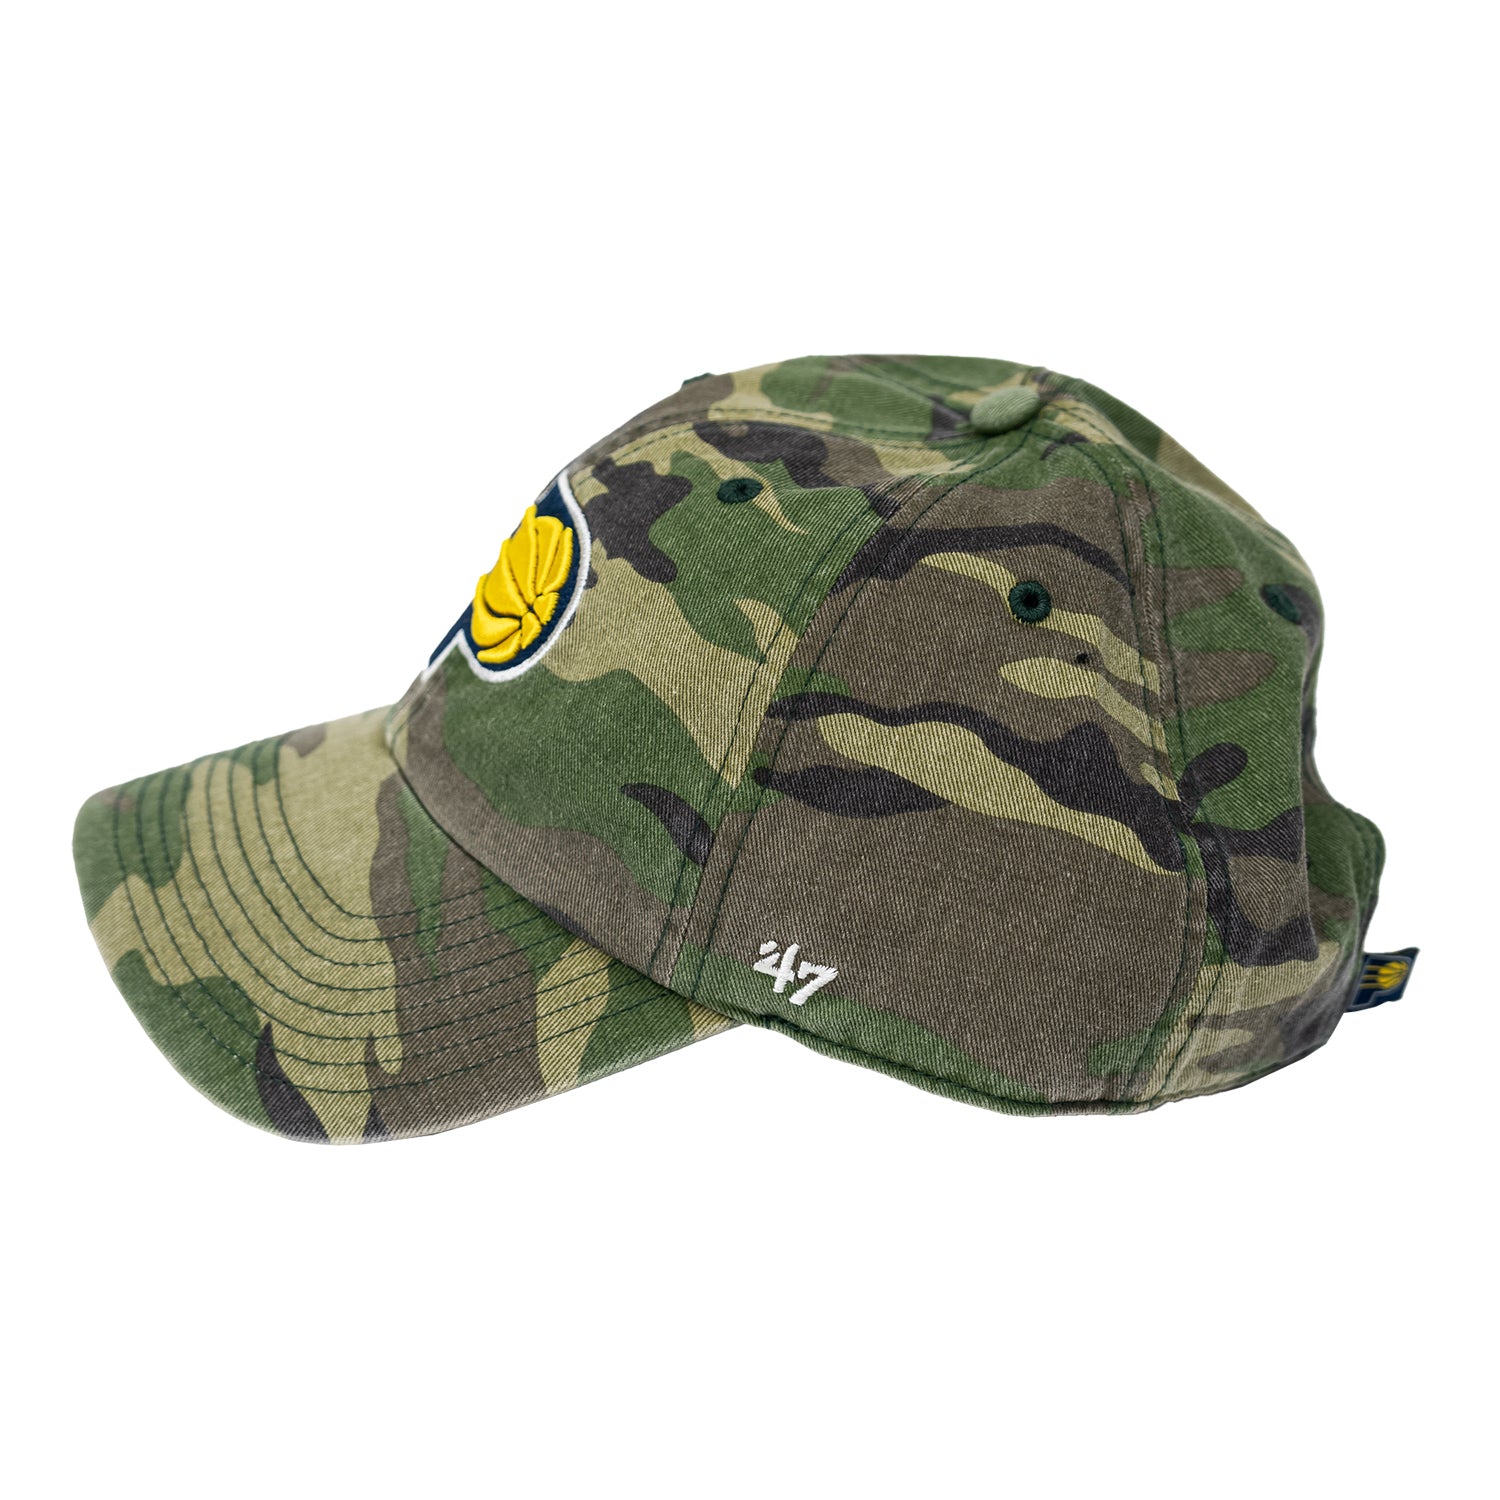 Adult Indiana Pacers Primary Logo Clean Up Hat in Camo by 47' Brand